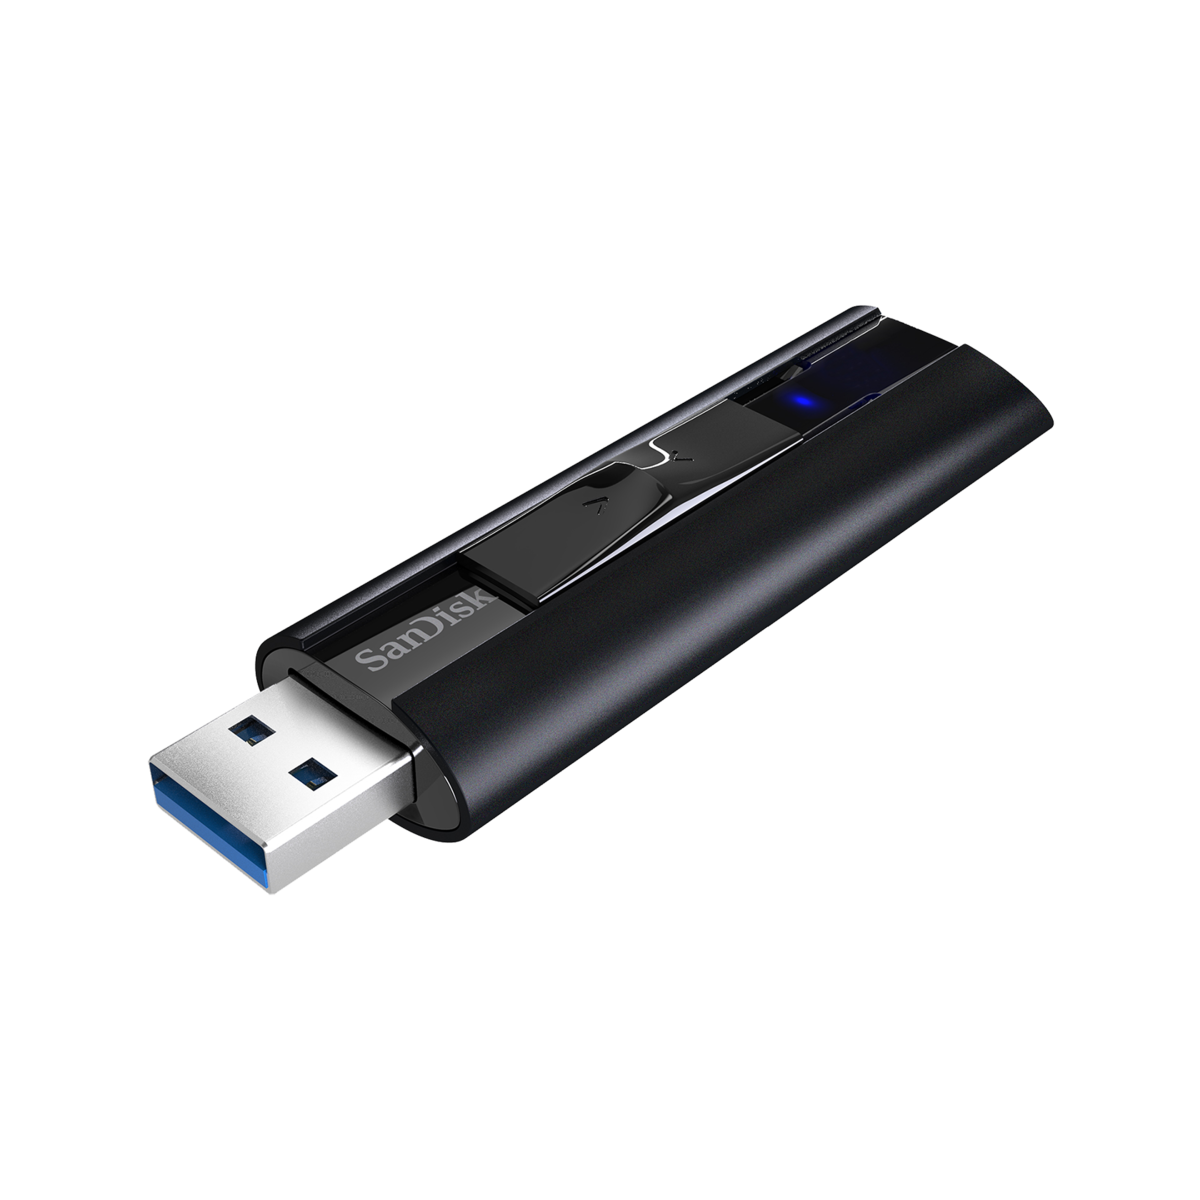 SanDisk 512GB Extreme Pro USB 3.2 Gen 1 Solid State Flash Drive 